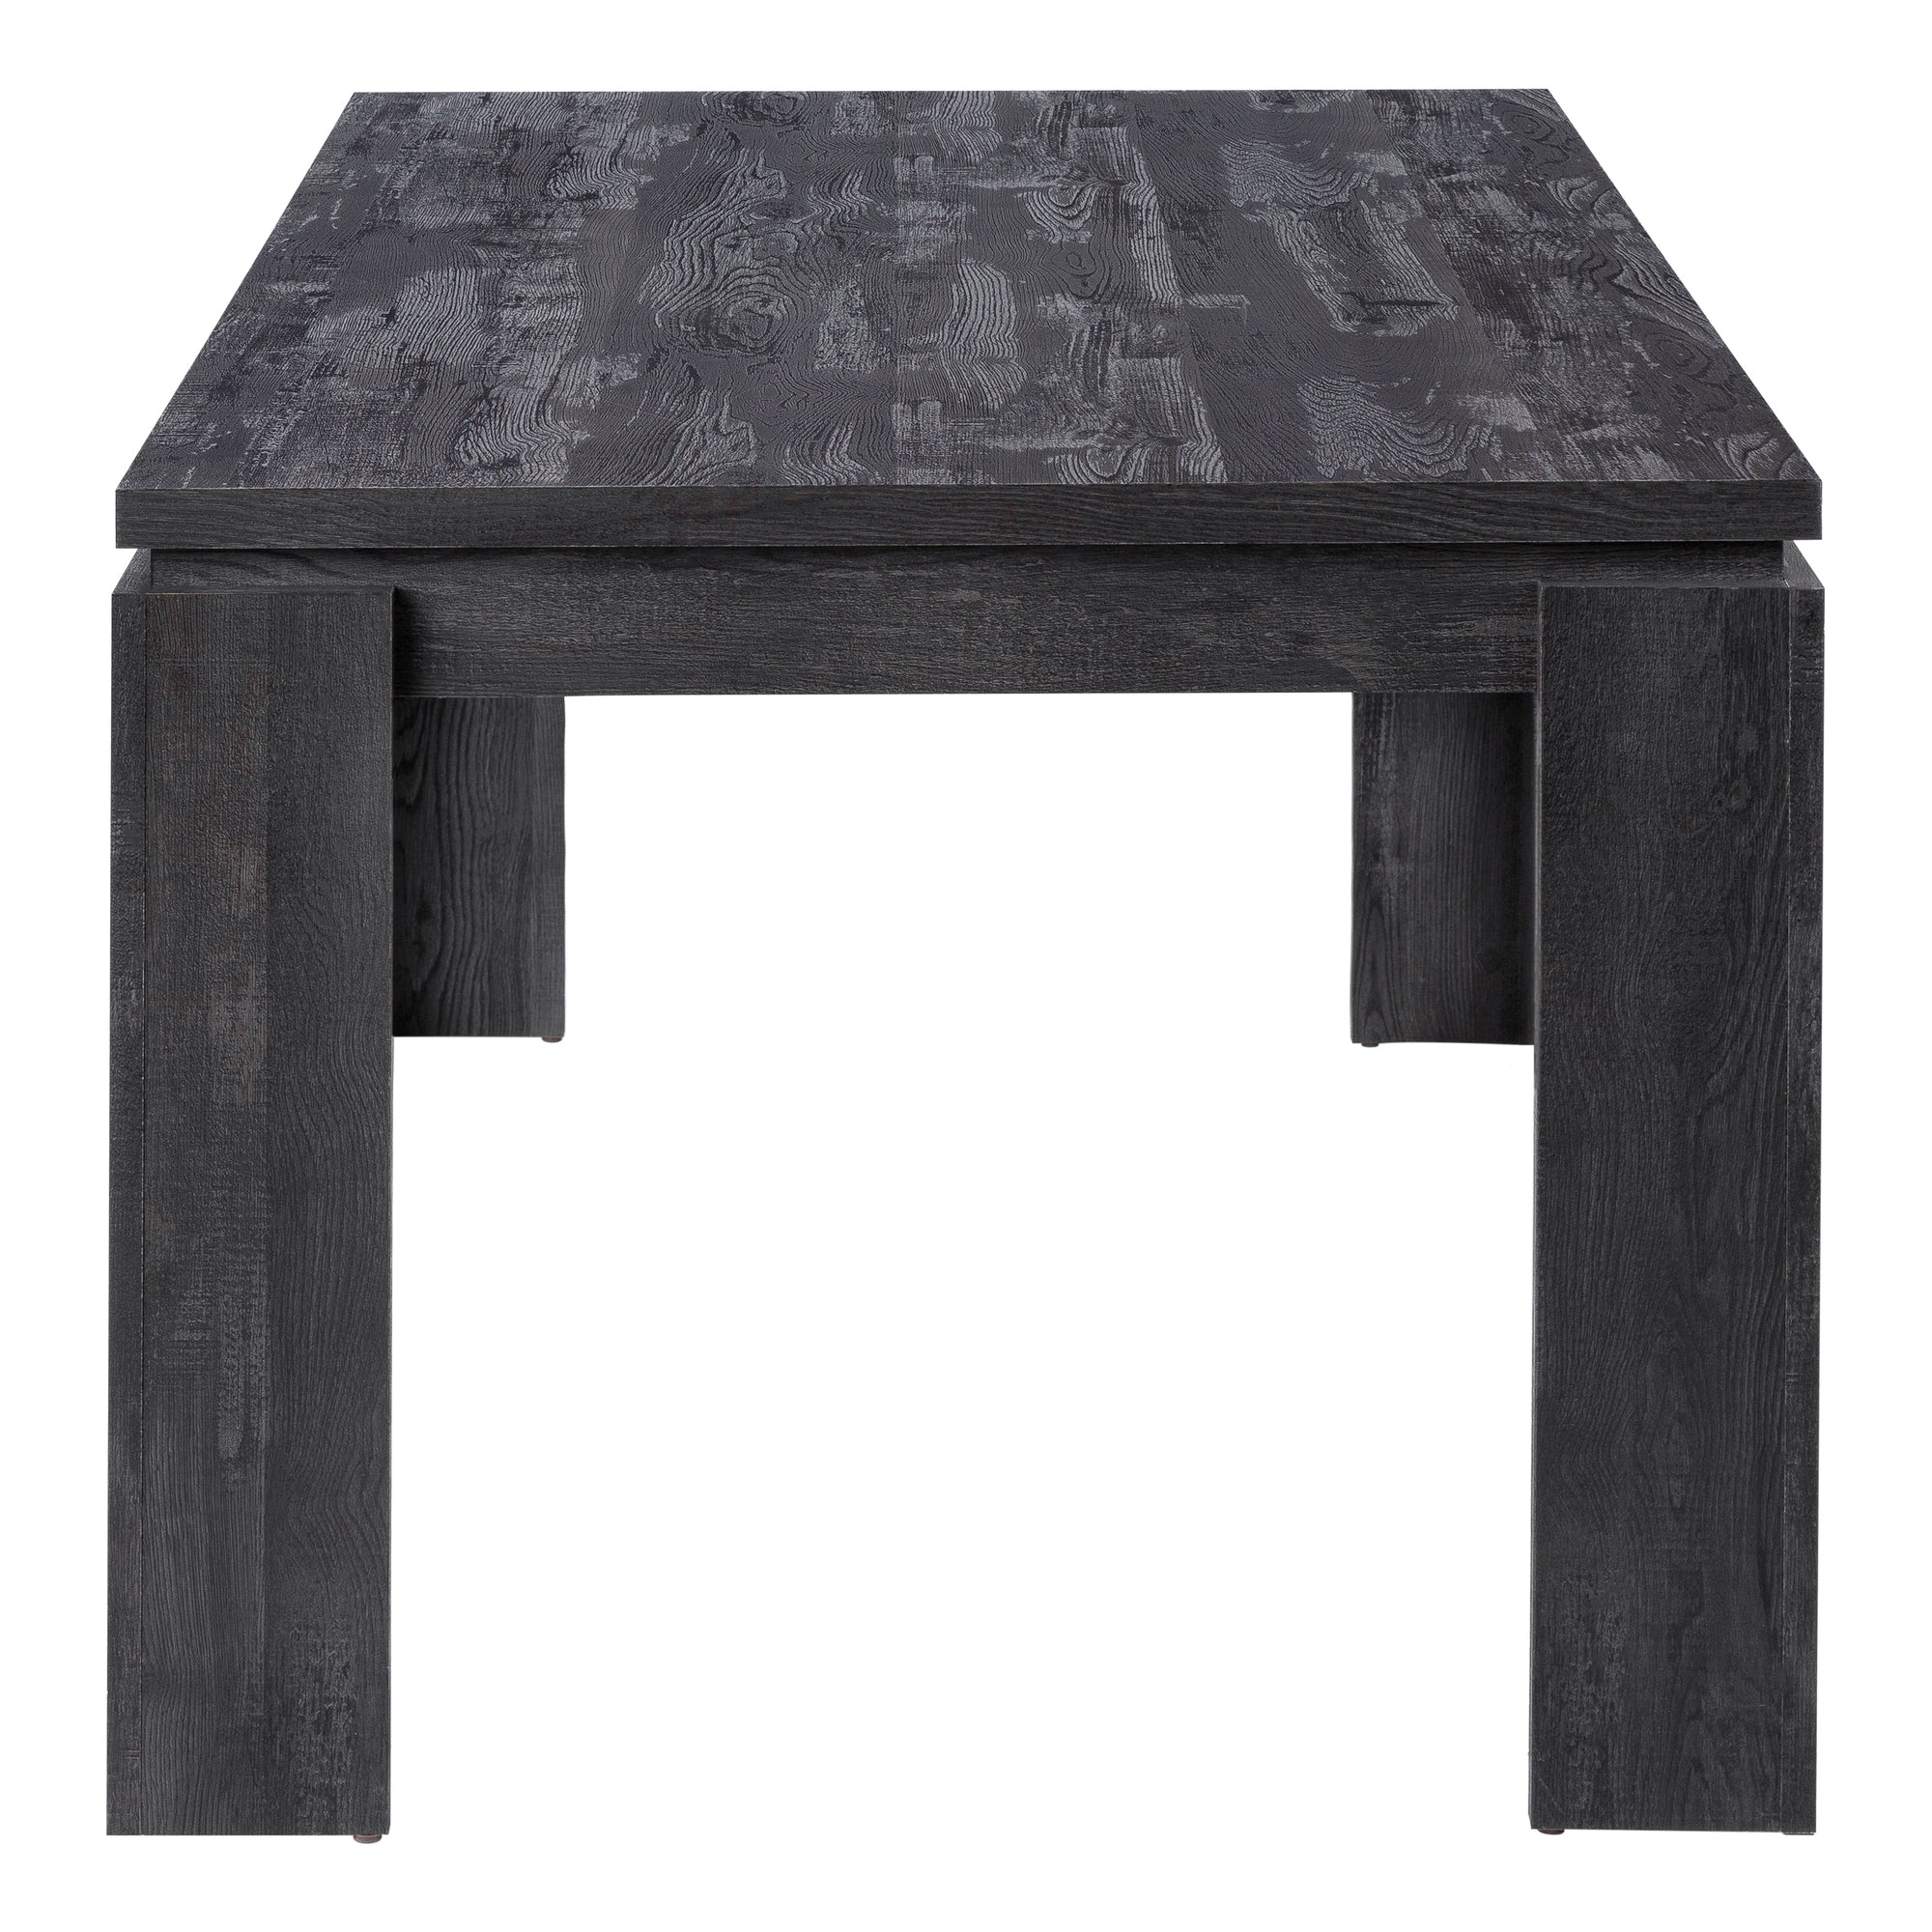 Dining Table - 36X 60 / Black Reclaimed Wood-Look